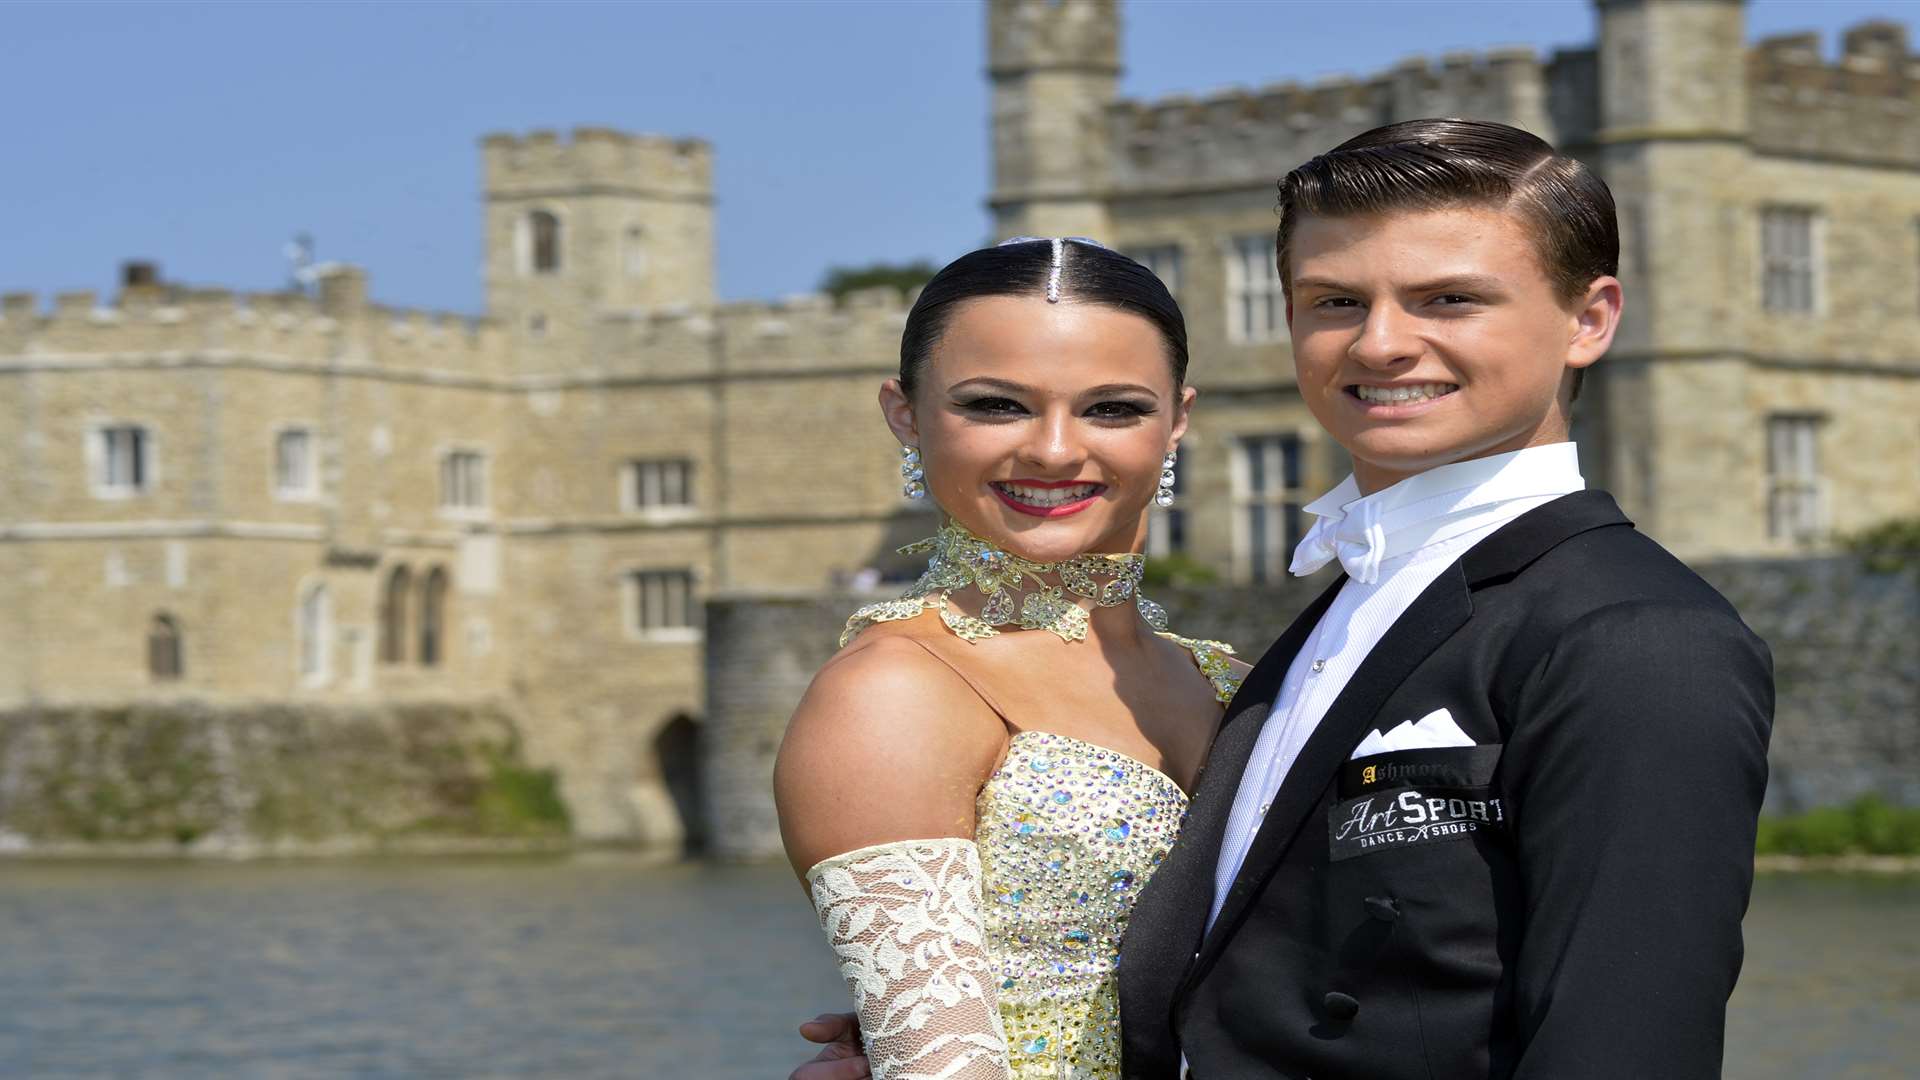 Max and Kate Harrison Junior dance champions will be at the Leeds Castle Classical Concert